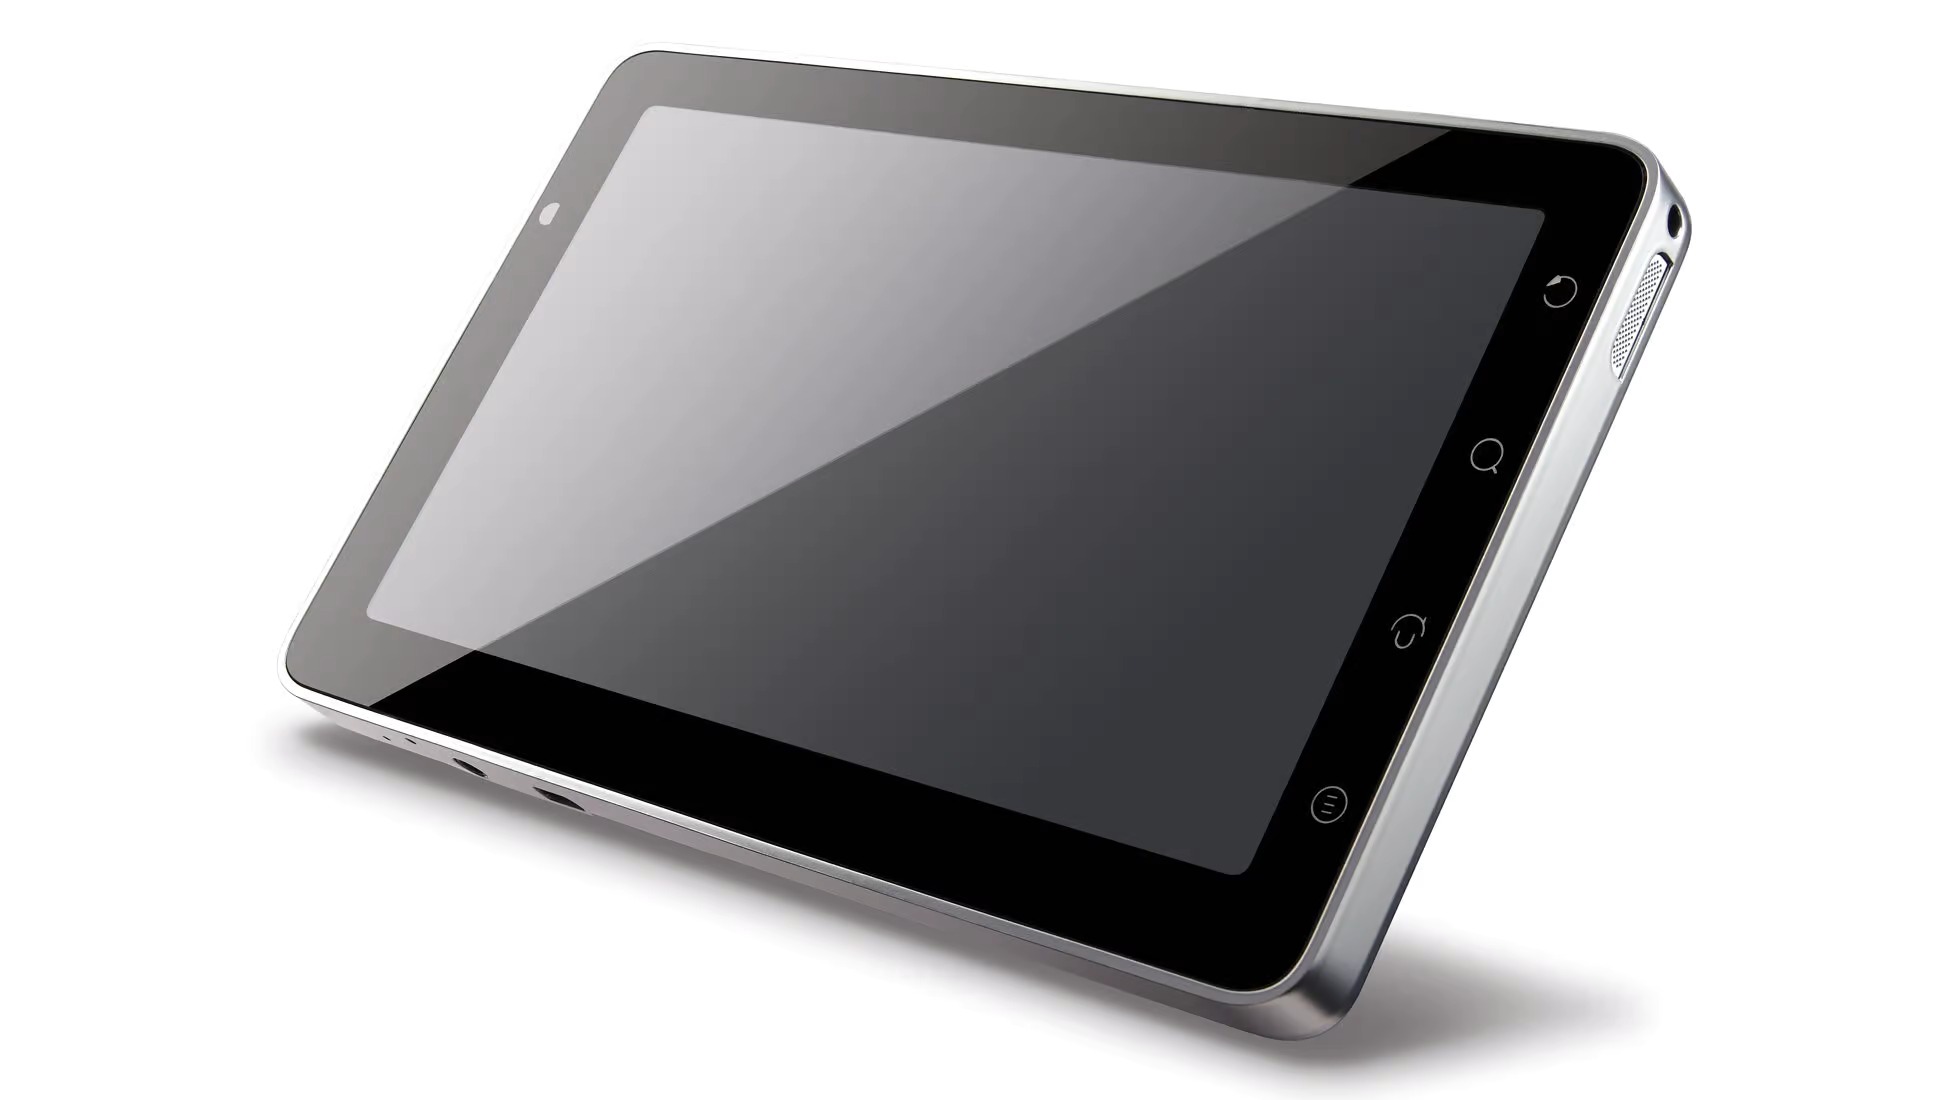 Where To Buy Viewsonic Tablet